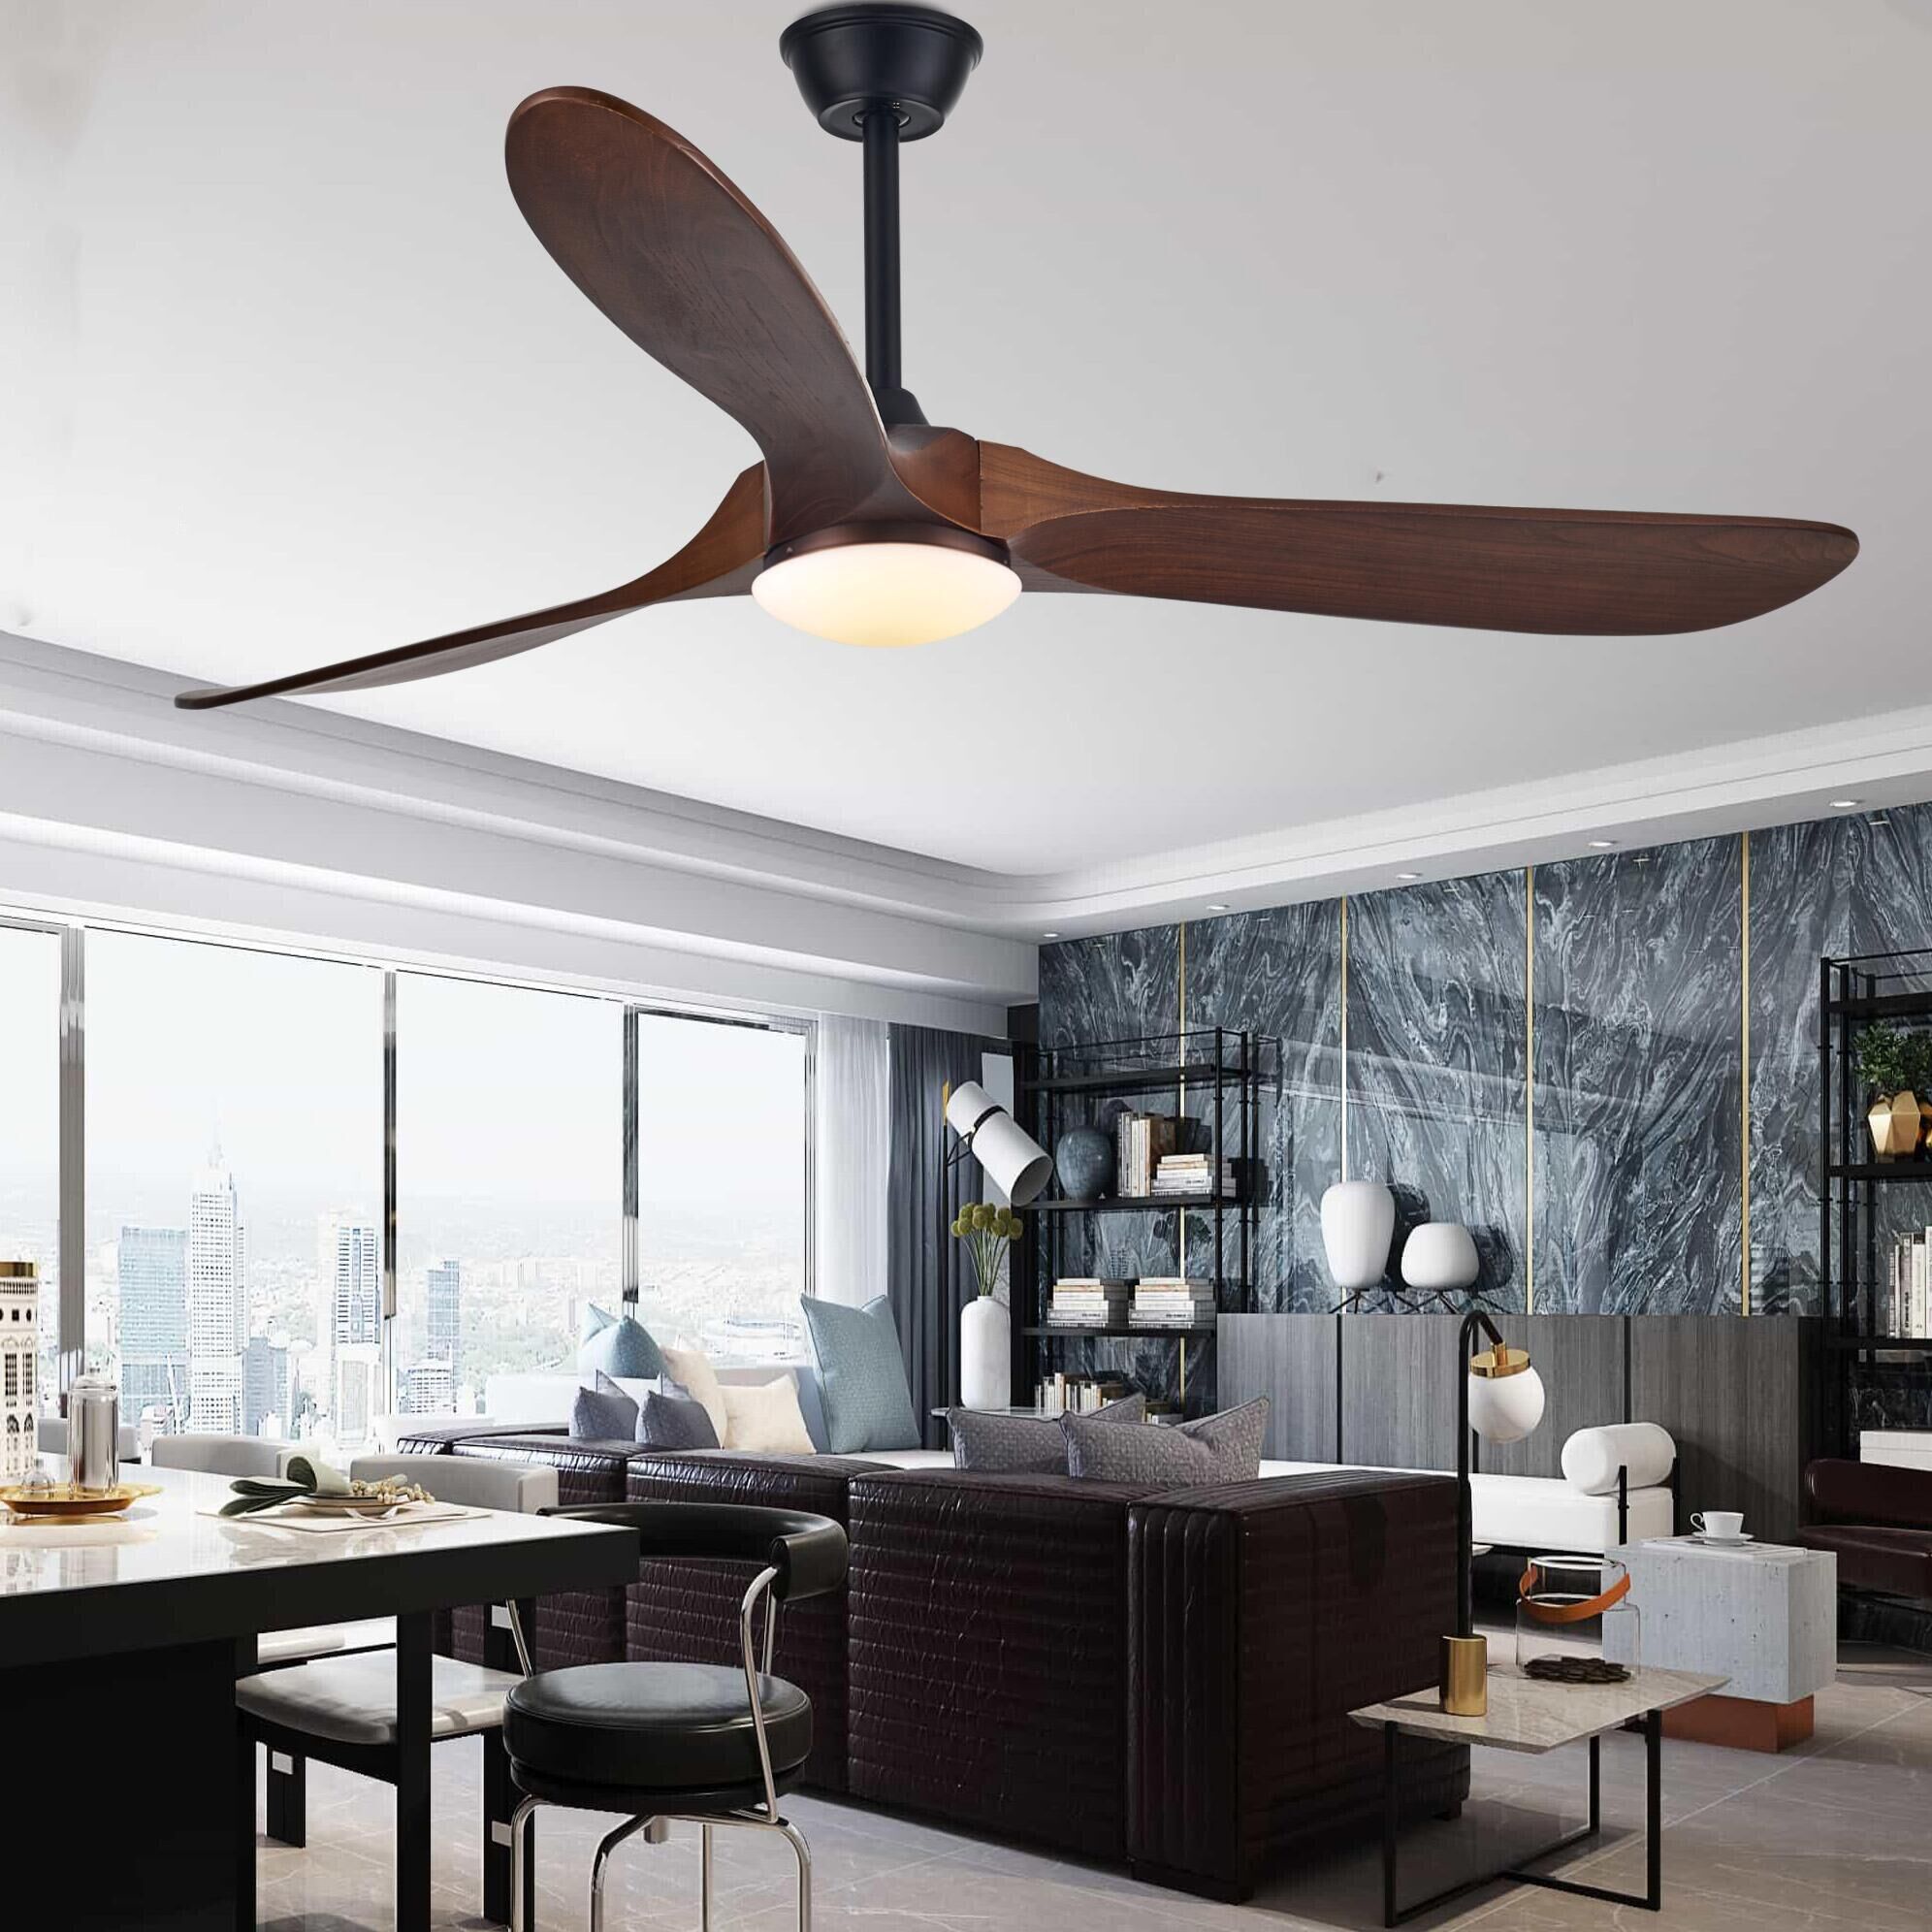 60 inch ceiling fan industrial vintage wooden ventilator with light Remote control decorative blower wood retro fans